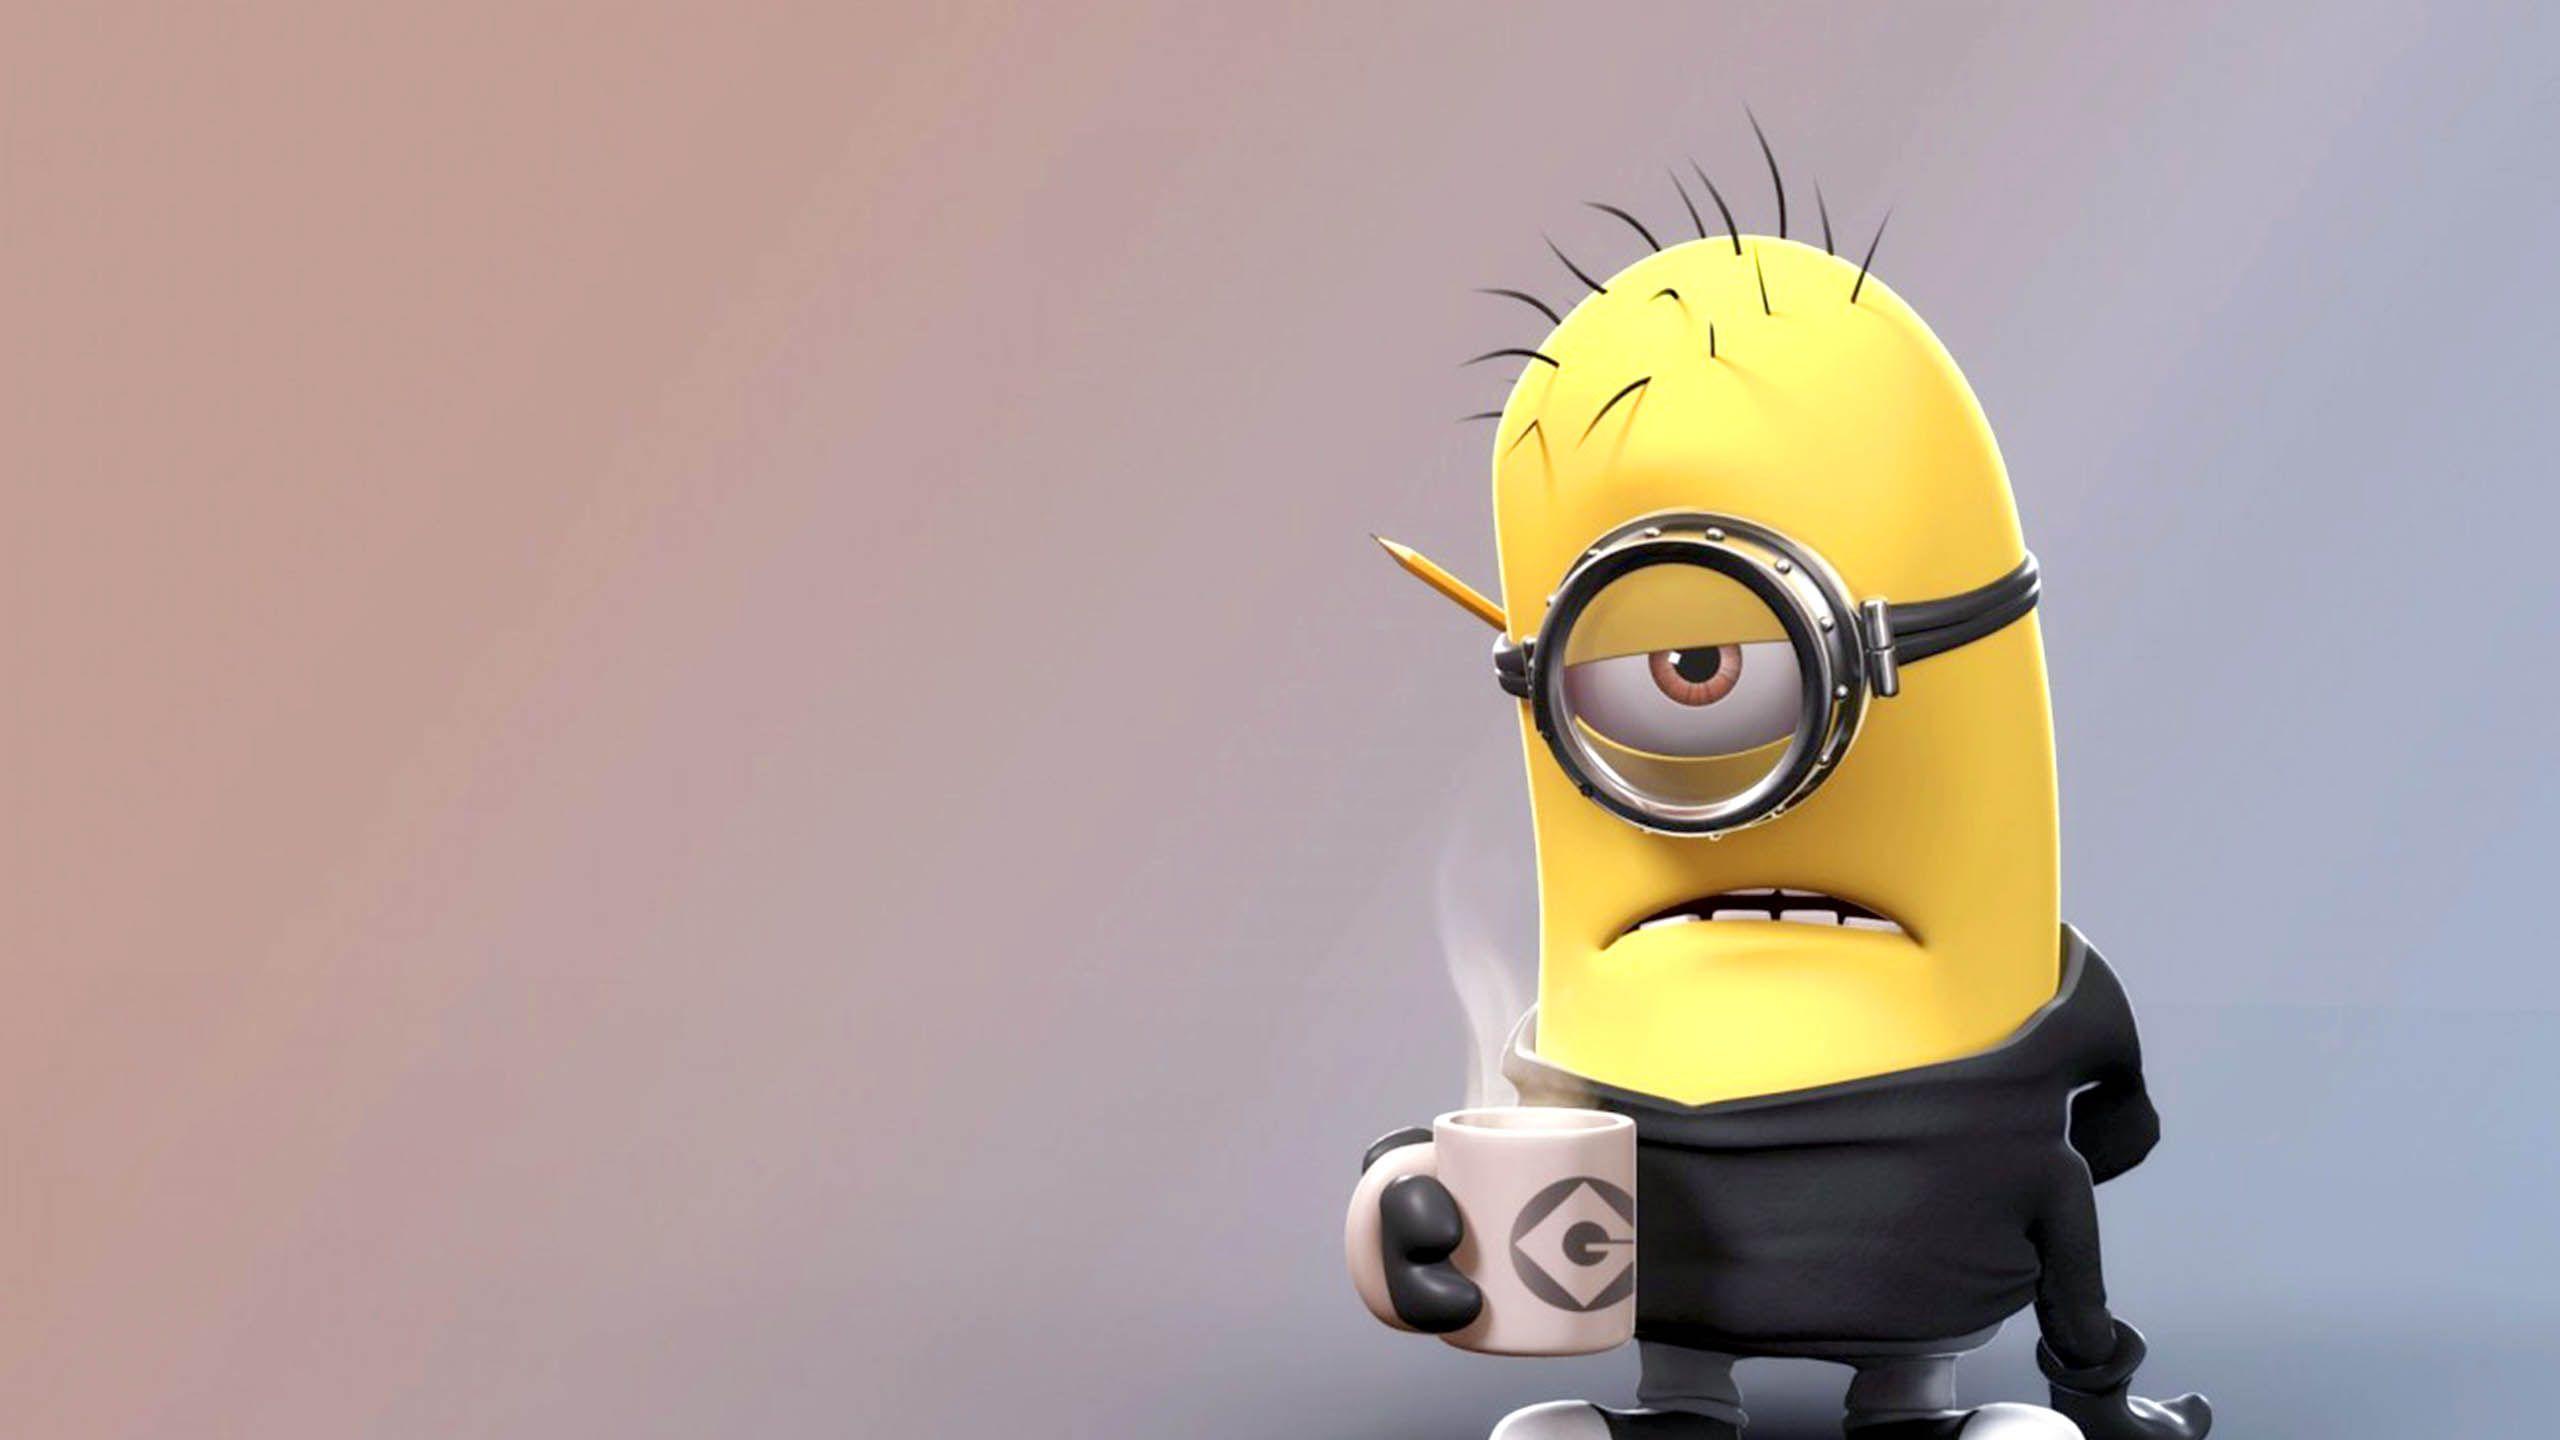 Cute Minions Live Wallpaper for iPhone 12 - free download